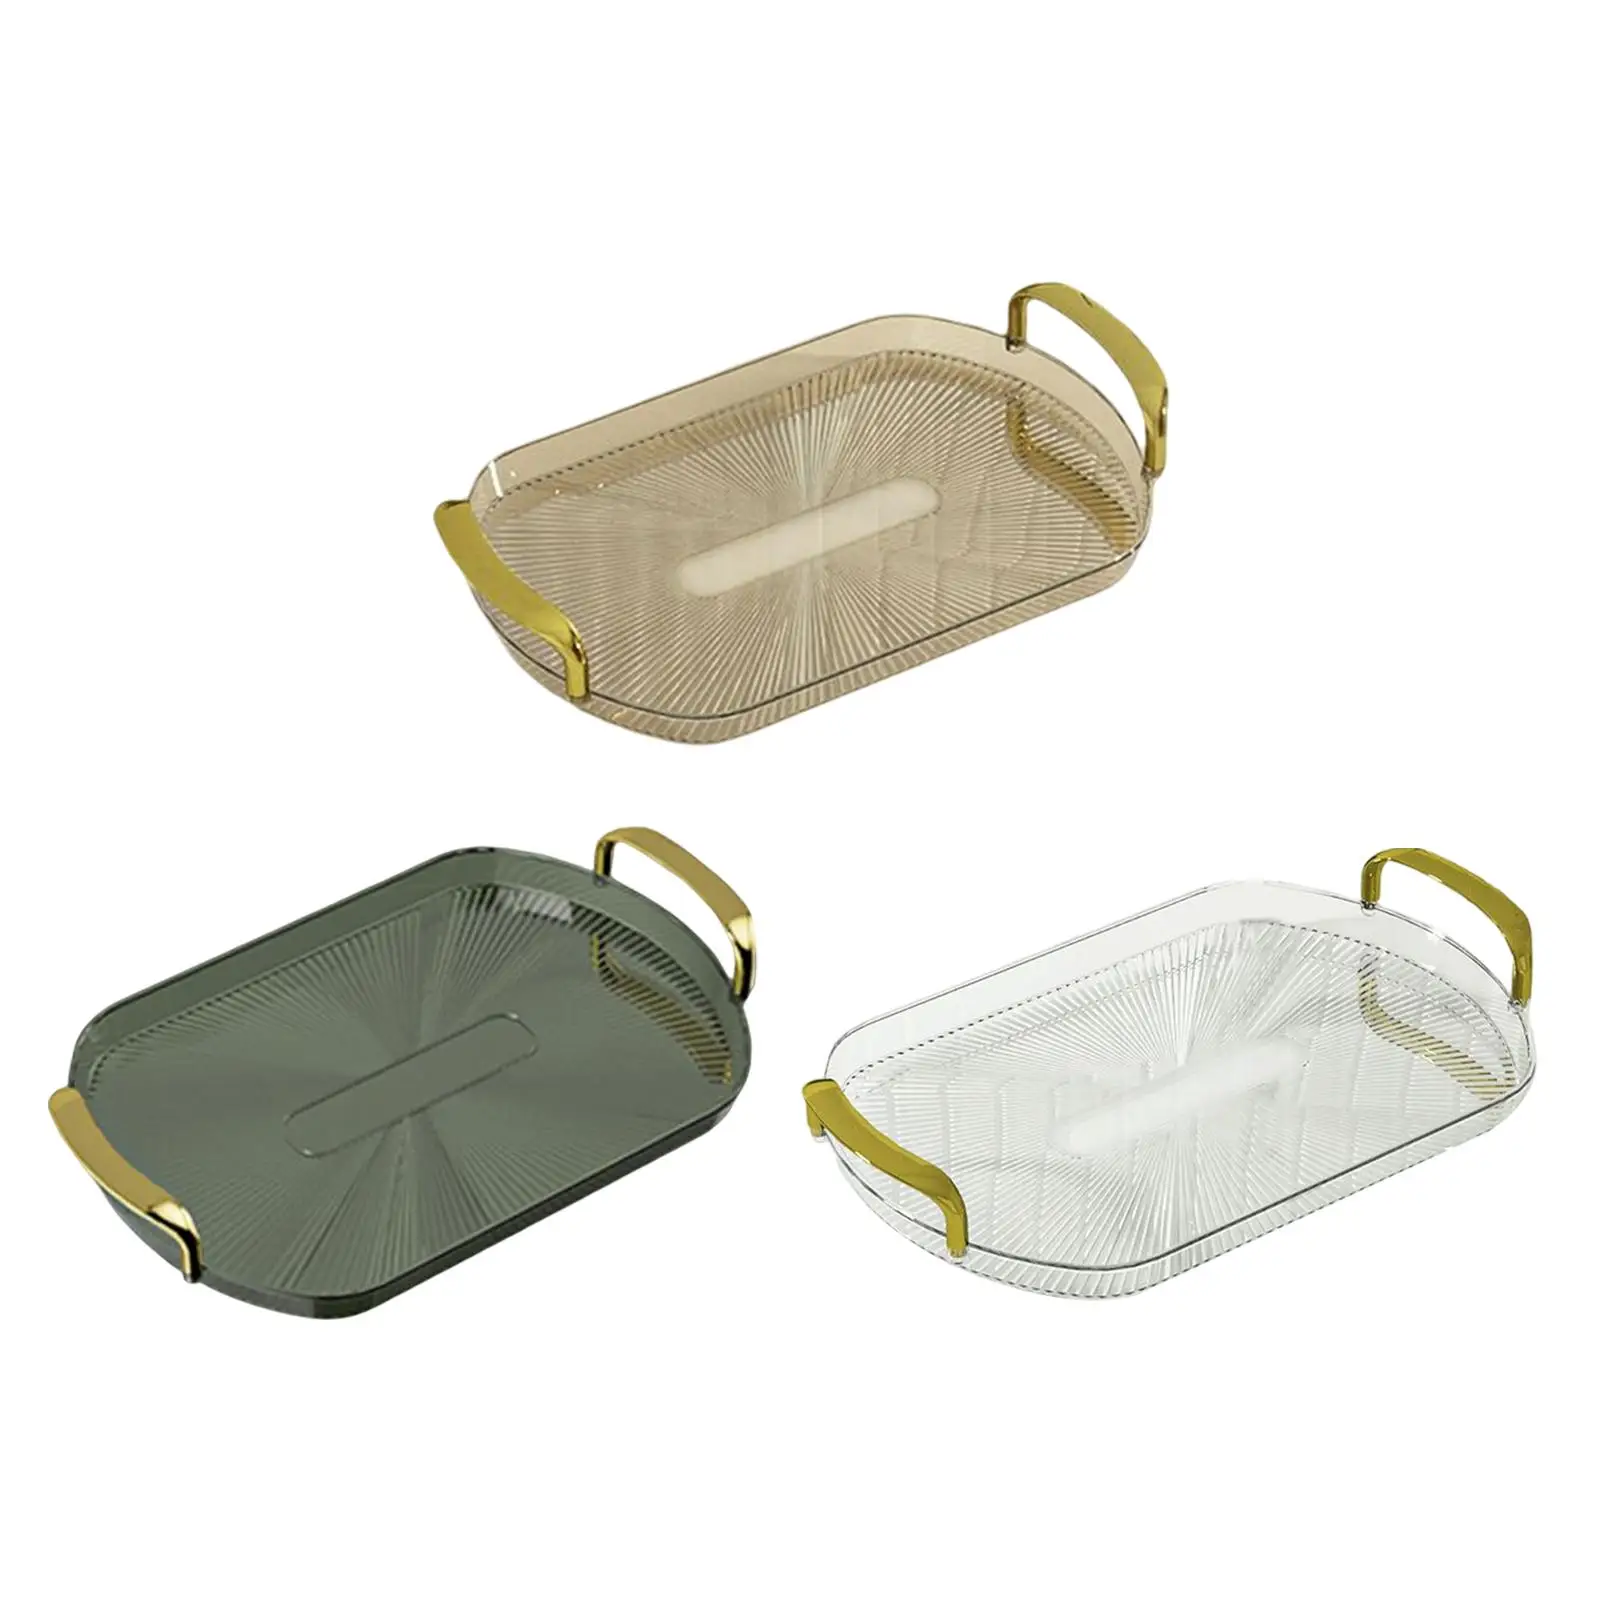 Versatile Serving Tray with Golden Handles for Kitchen, Bathroom, Makeup Tray Durable Decorative Universal Multi Use